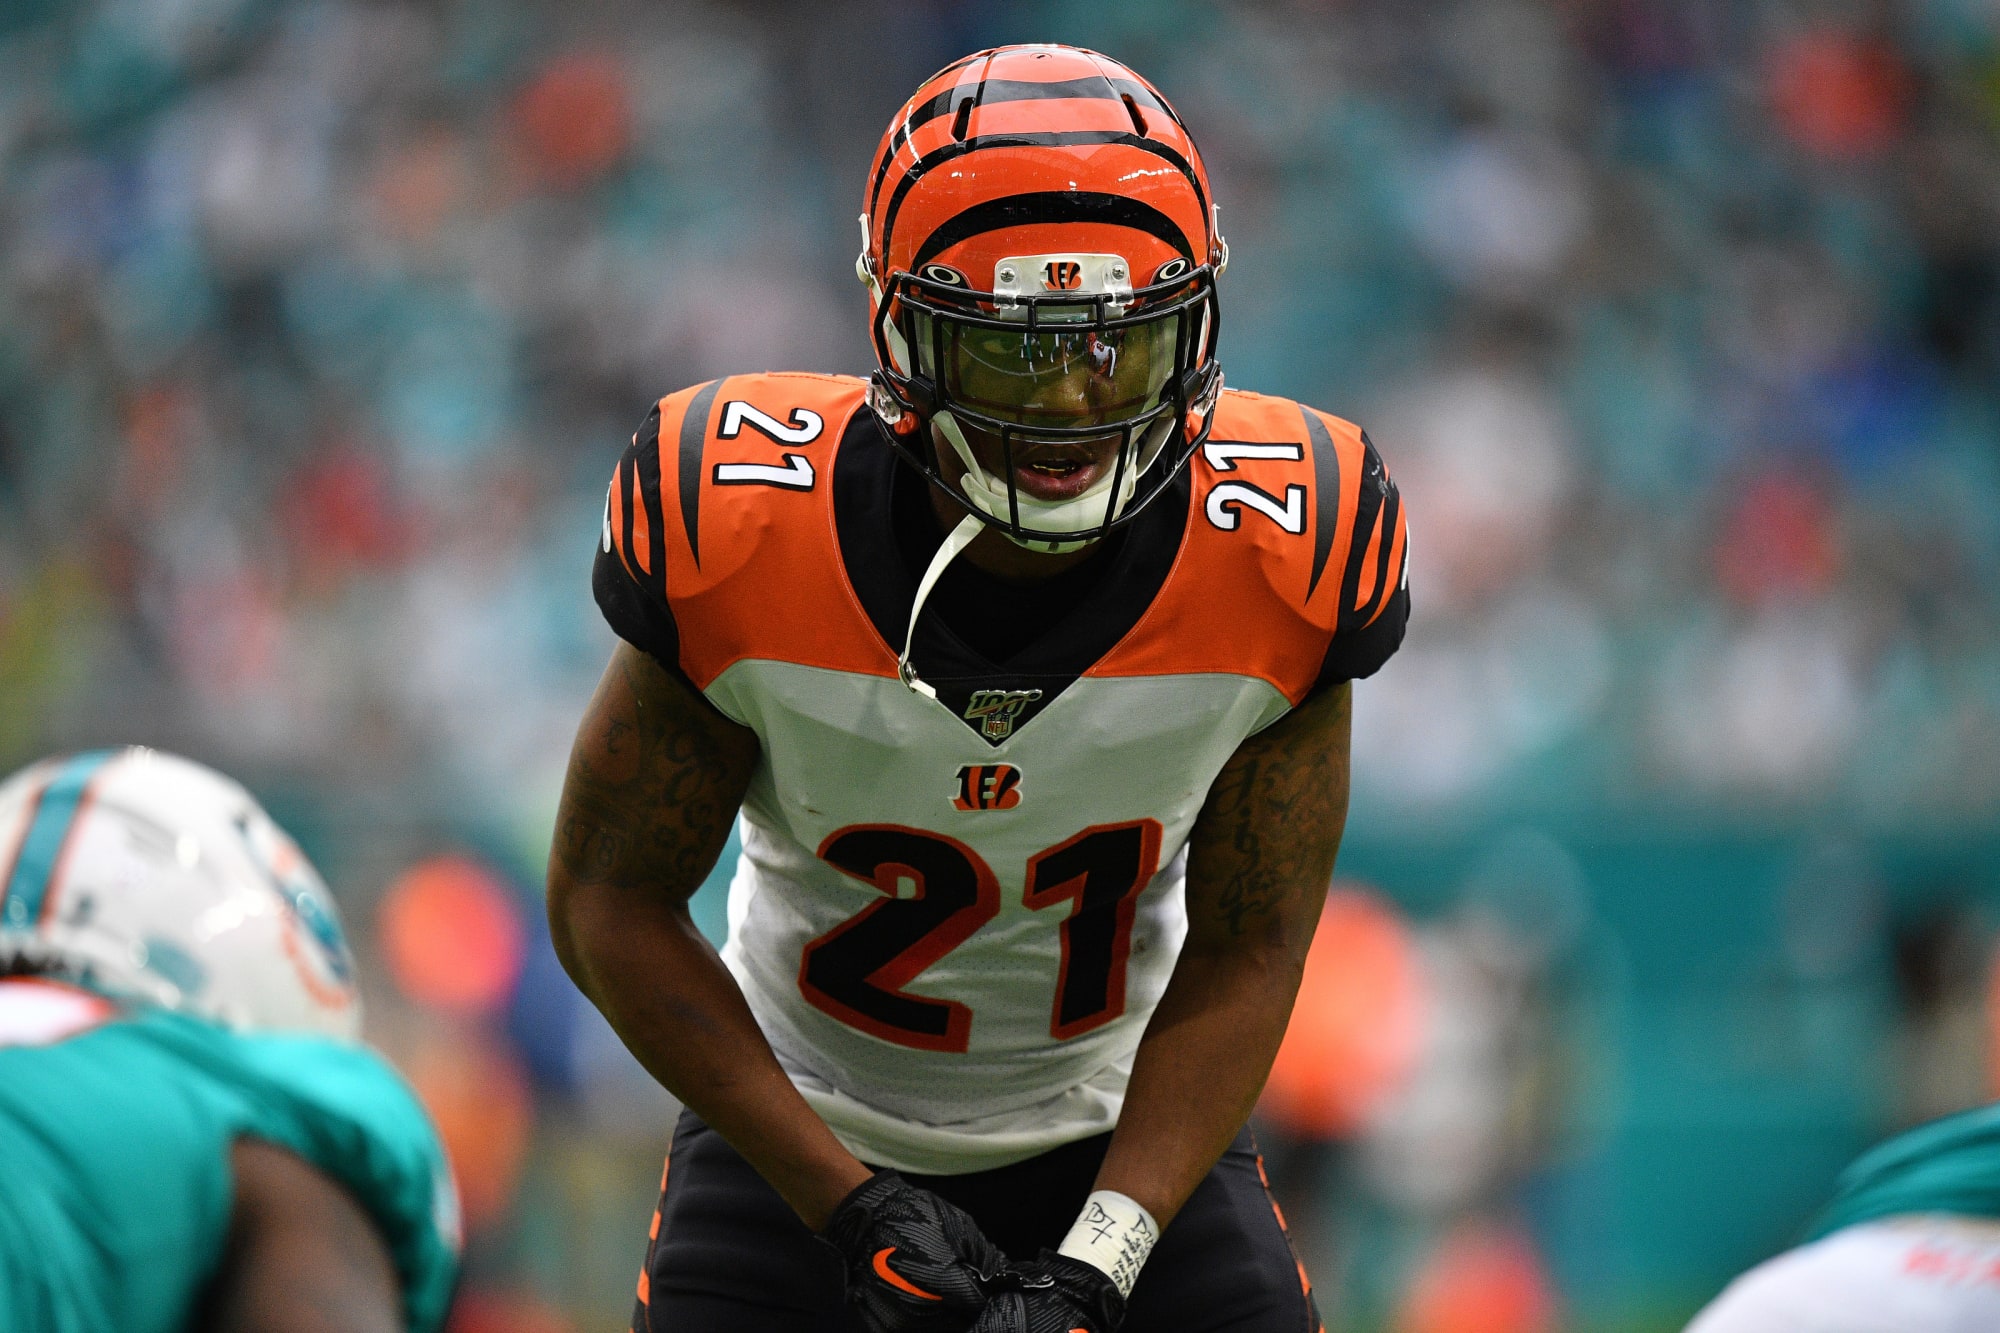 Darquee Dennard is a dream slot CB signing for the Seahawks